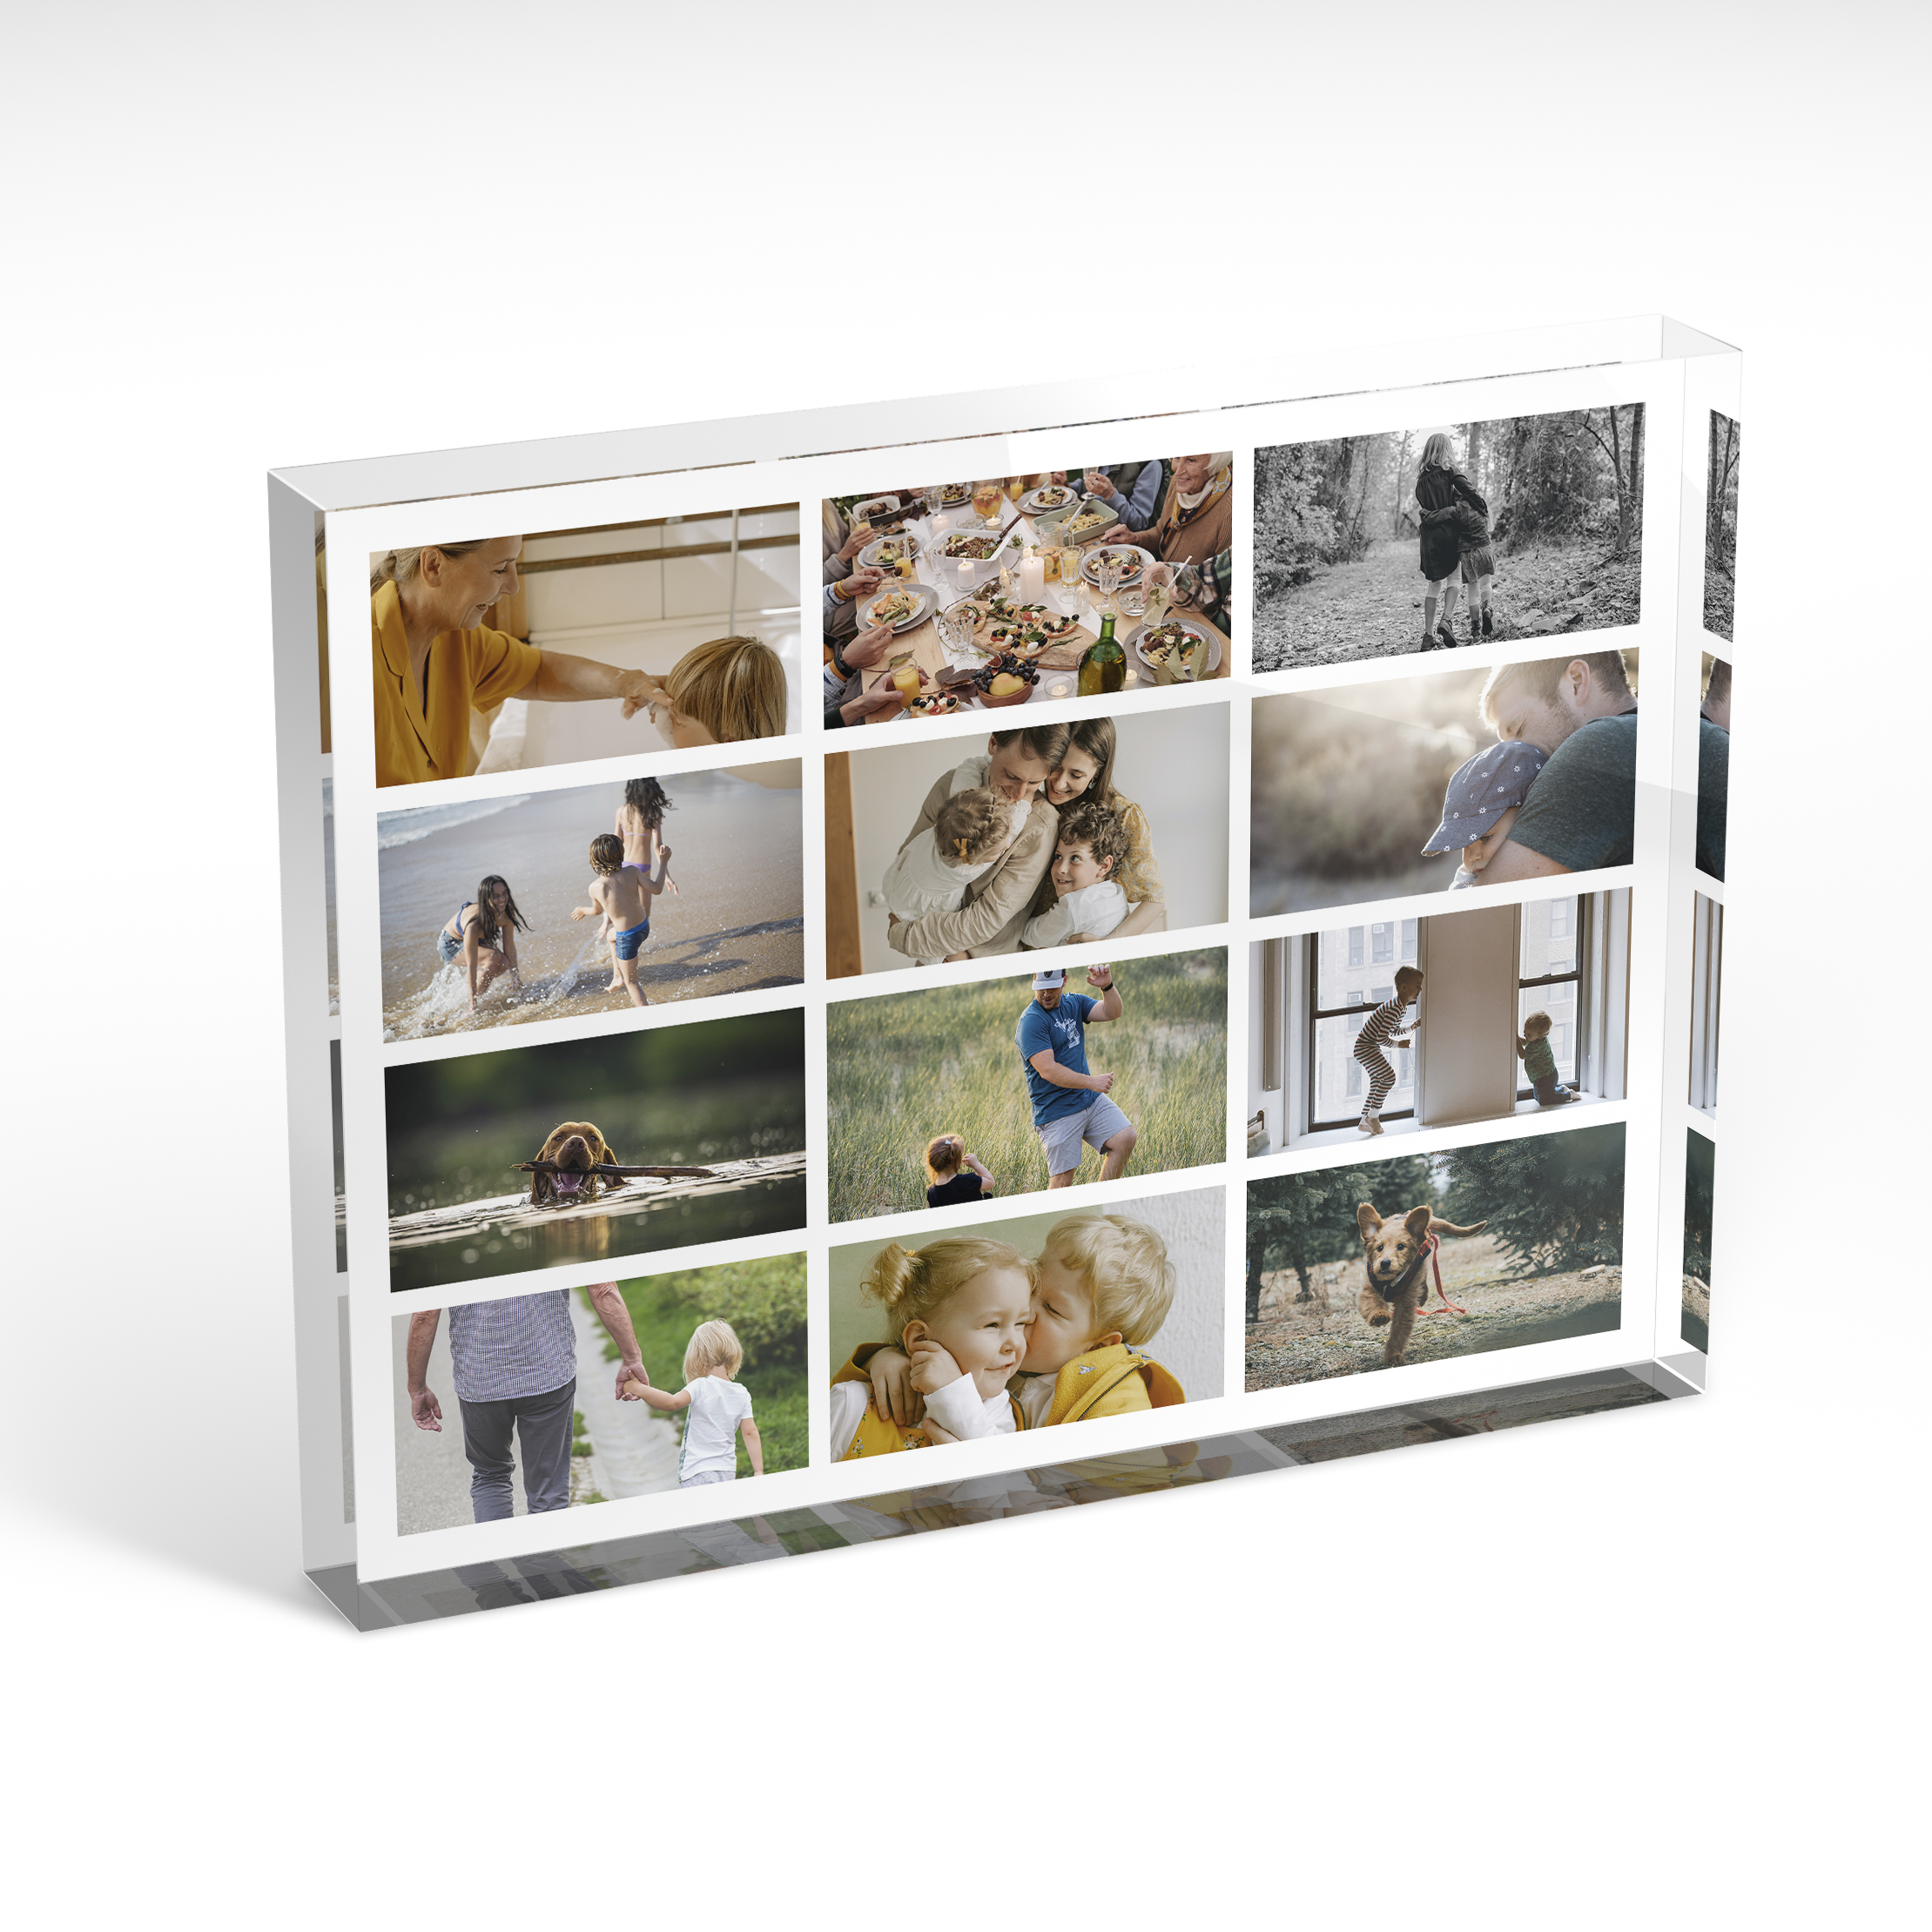 An angled side view of a landscape layout Acrylic Photo Block with space for 10+ photos. Thiis design is named "Collage of Life". 